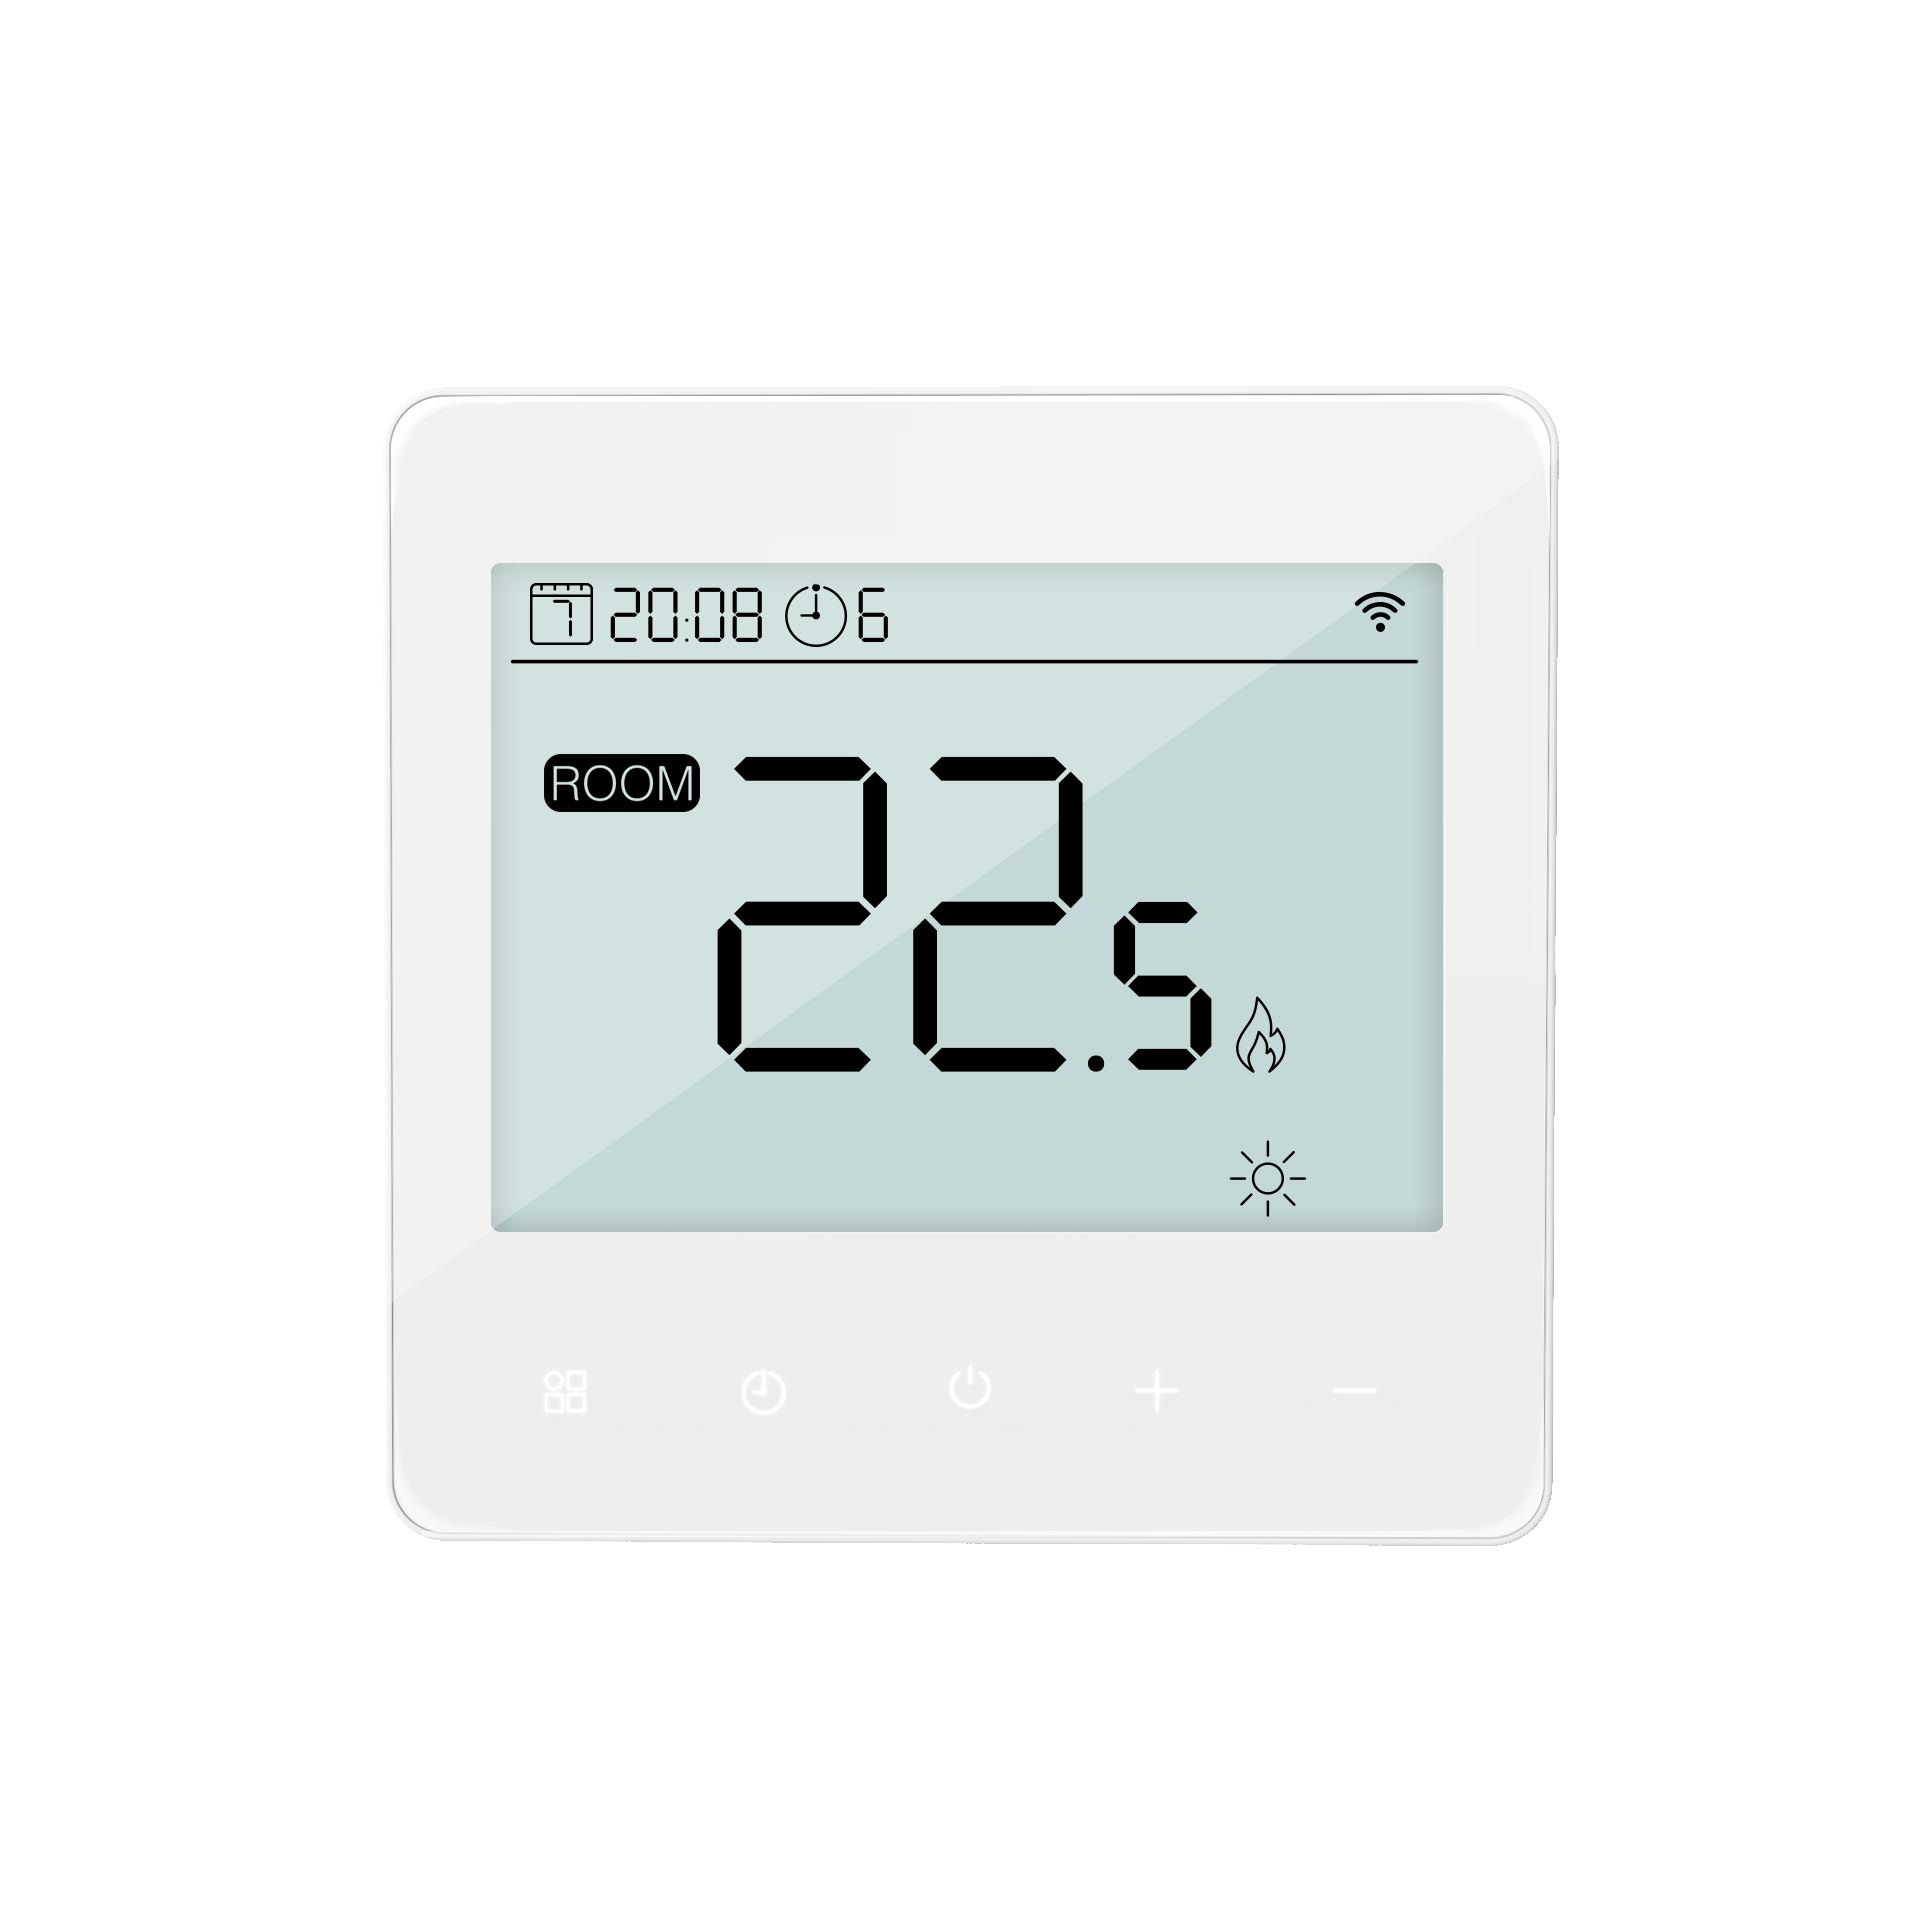 WiFi Programmable Thermostats for Electric/Water Underfloor Heating, Compatible with Google Home and Alexa Voice Control